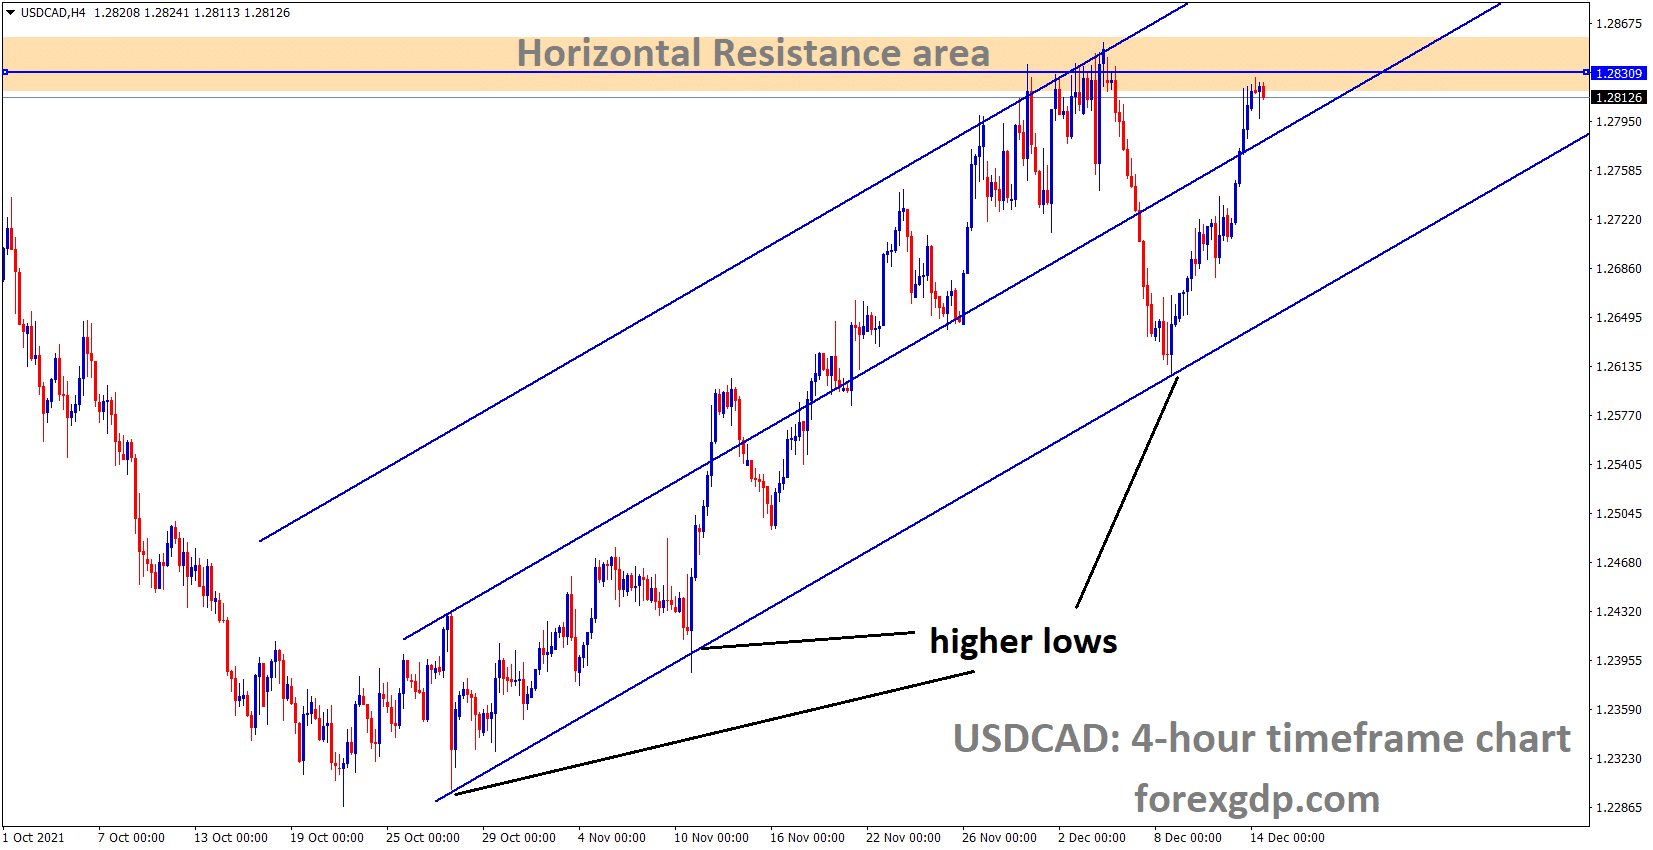 USDCAD is moving in an ascending channel and the market has reached the previous horizontal resistance area of the channel